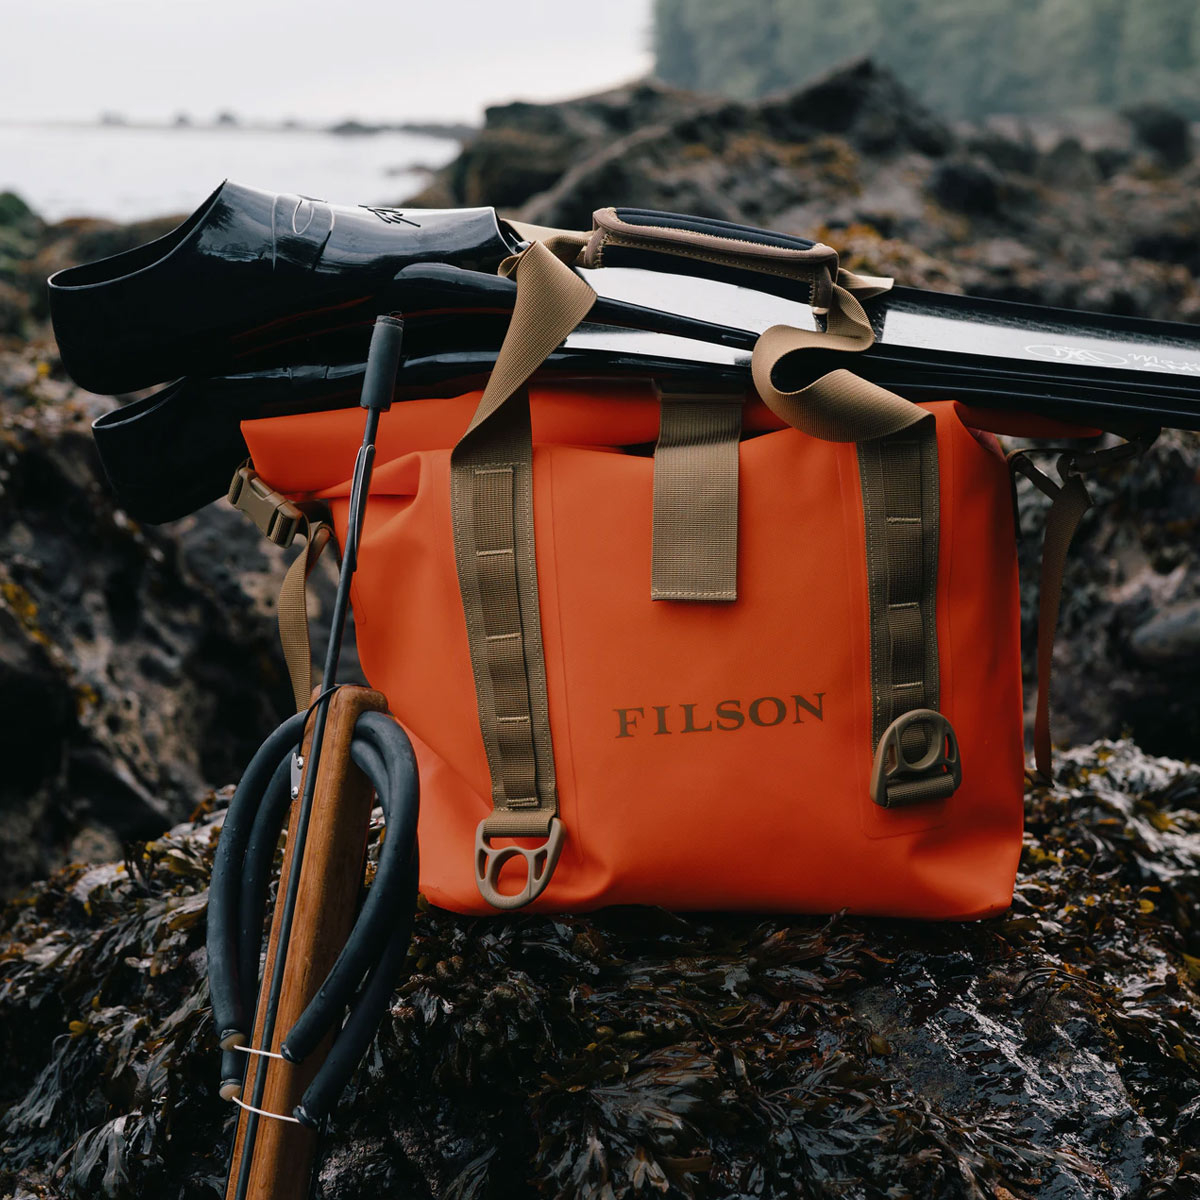 Filson Dry Roll-Top Tote Bag Flame, keeps your gear dry in any weather